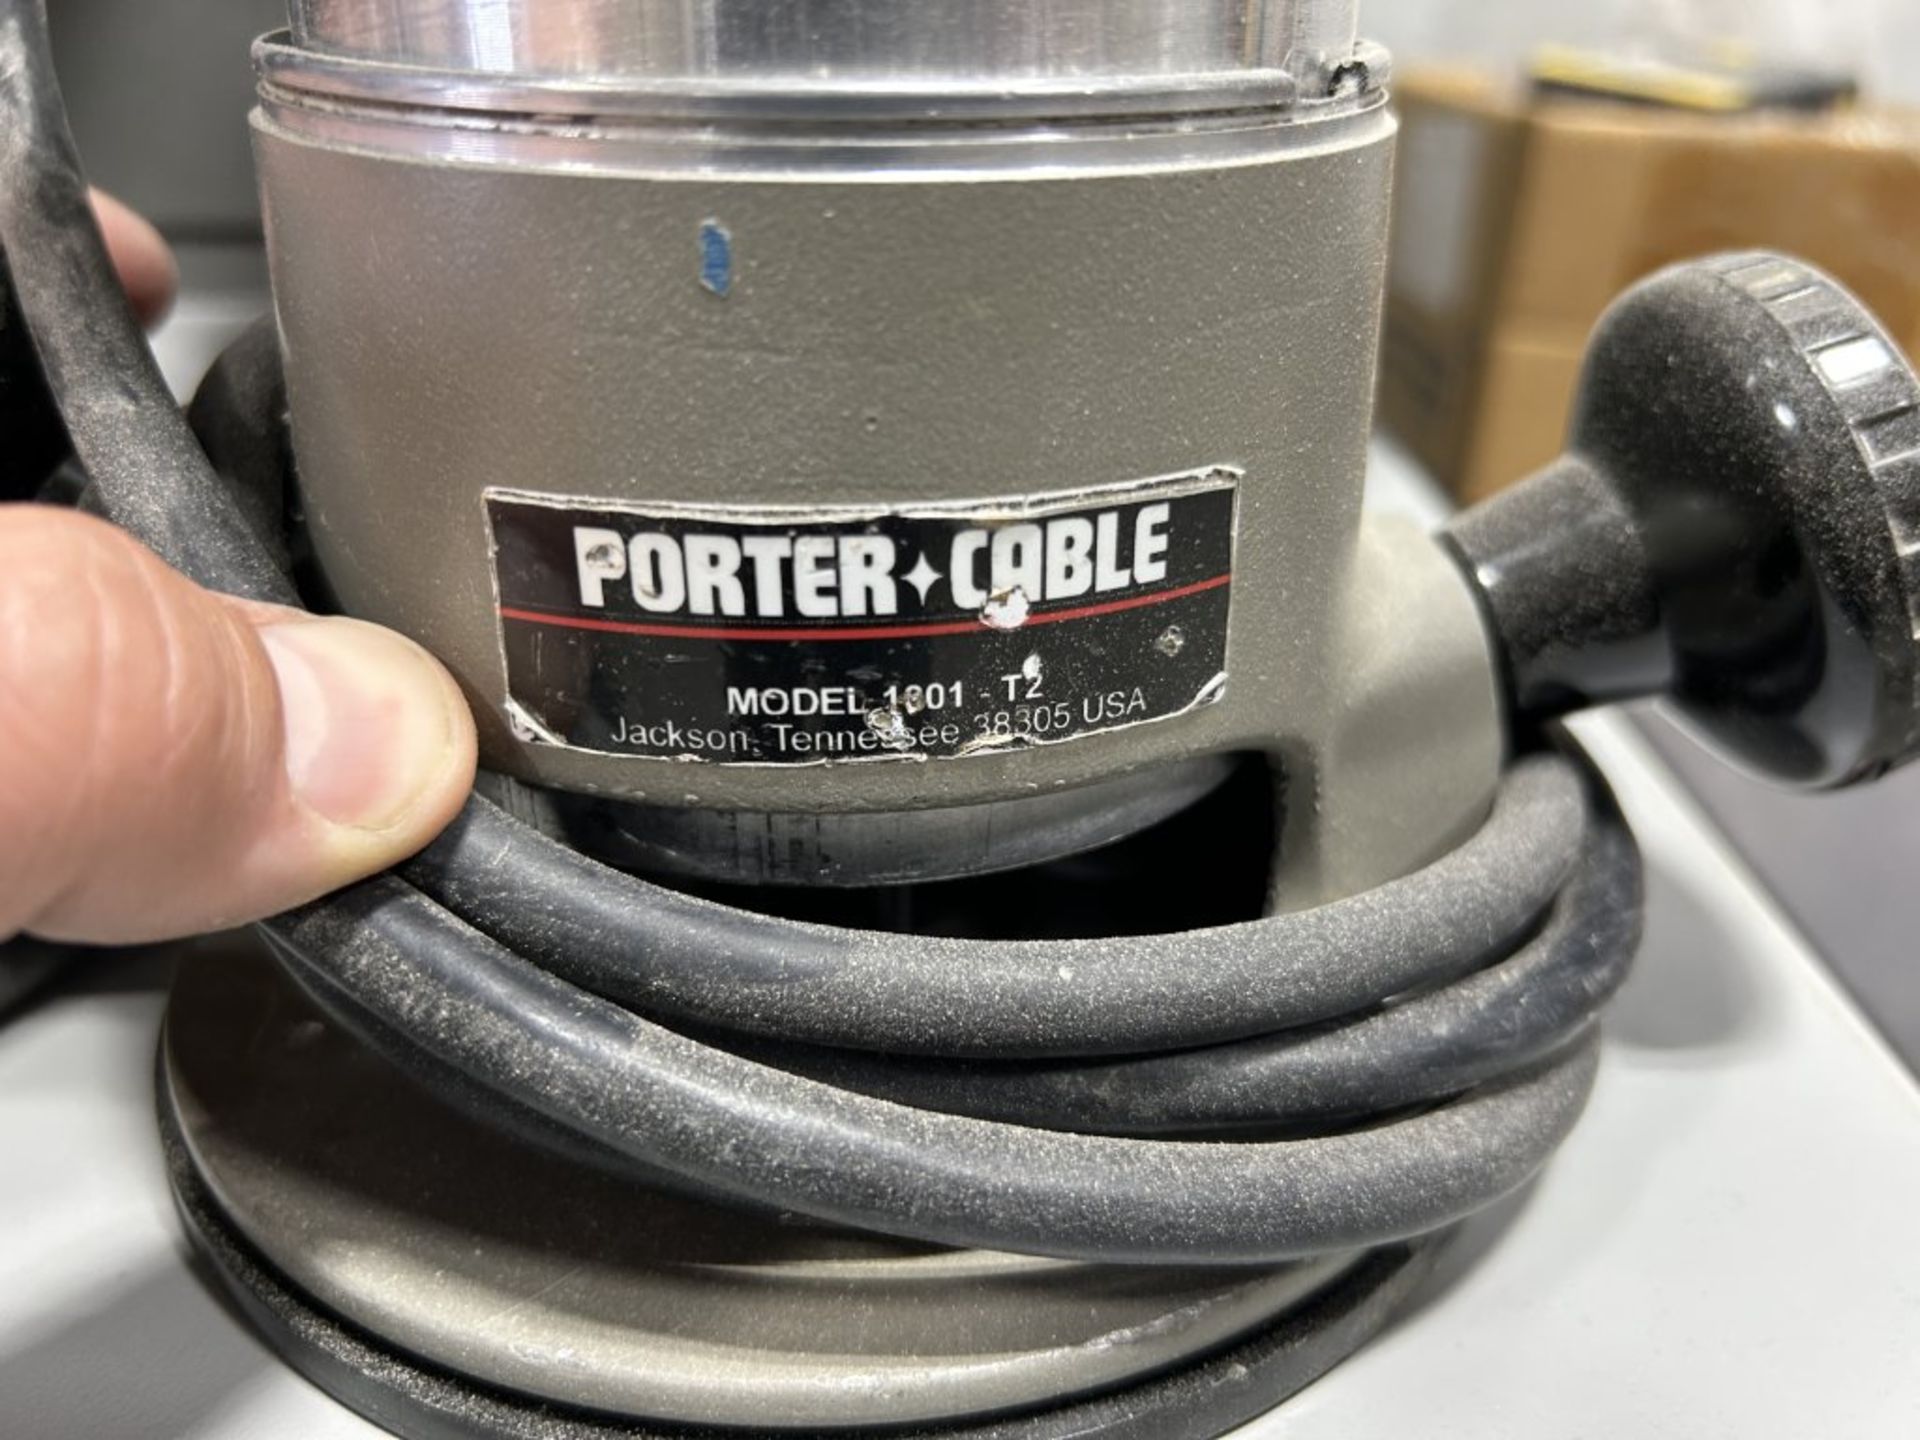 PORTER-CABLE SPEEDMATIC 7539 ROUTER AND PORTER-CABLE 690LR ROUTER - Bild 7 aus 8